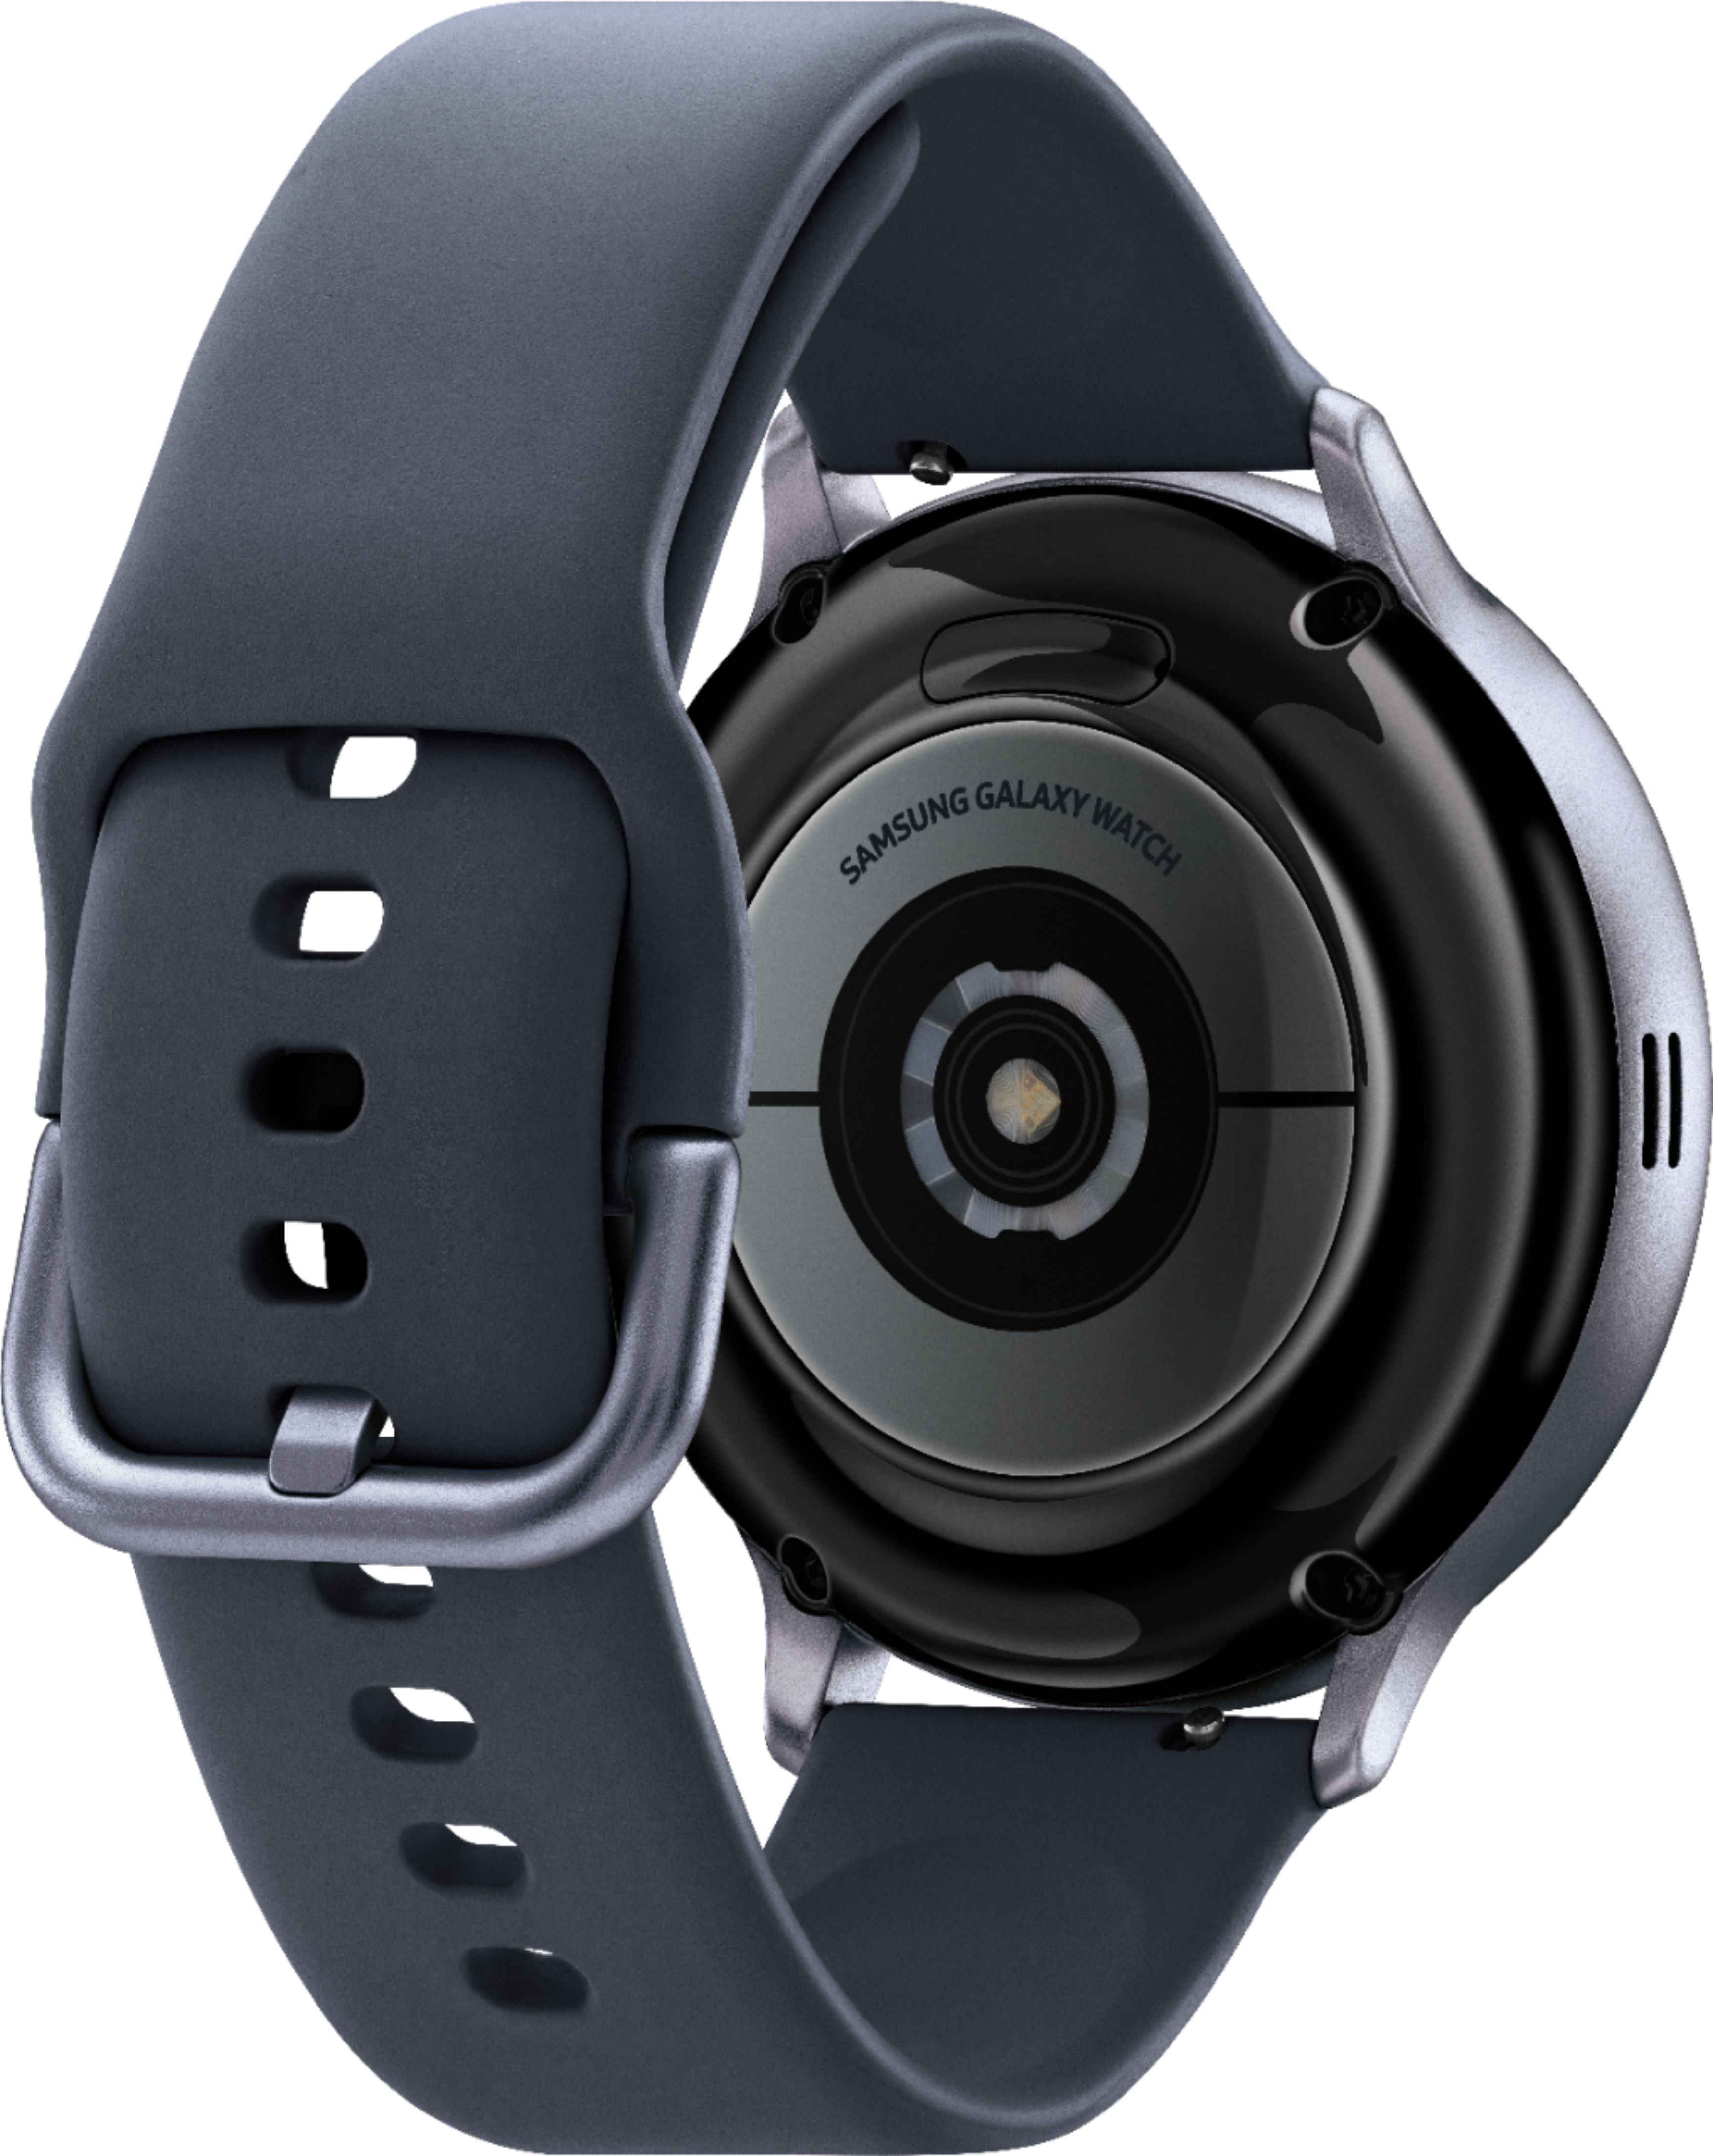  Obligatoryy Compatible with galaxy Active 2 Watch